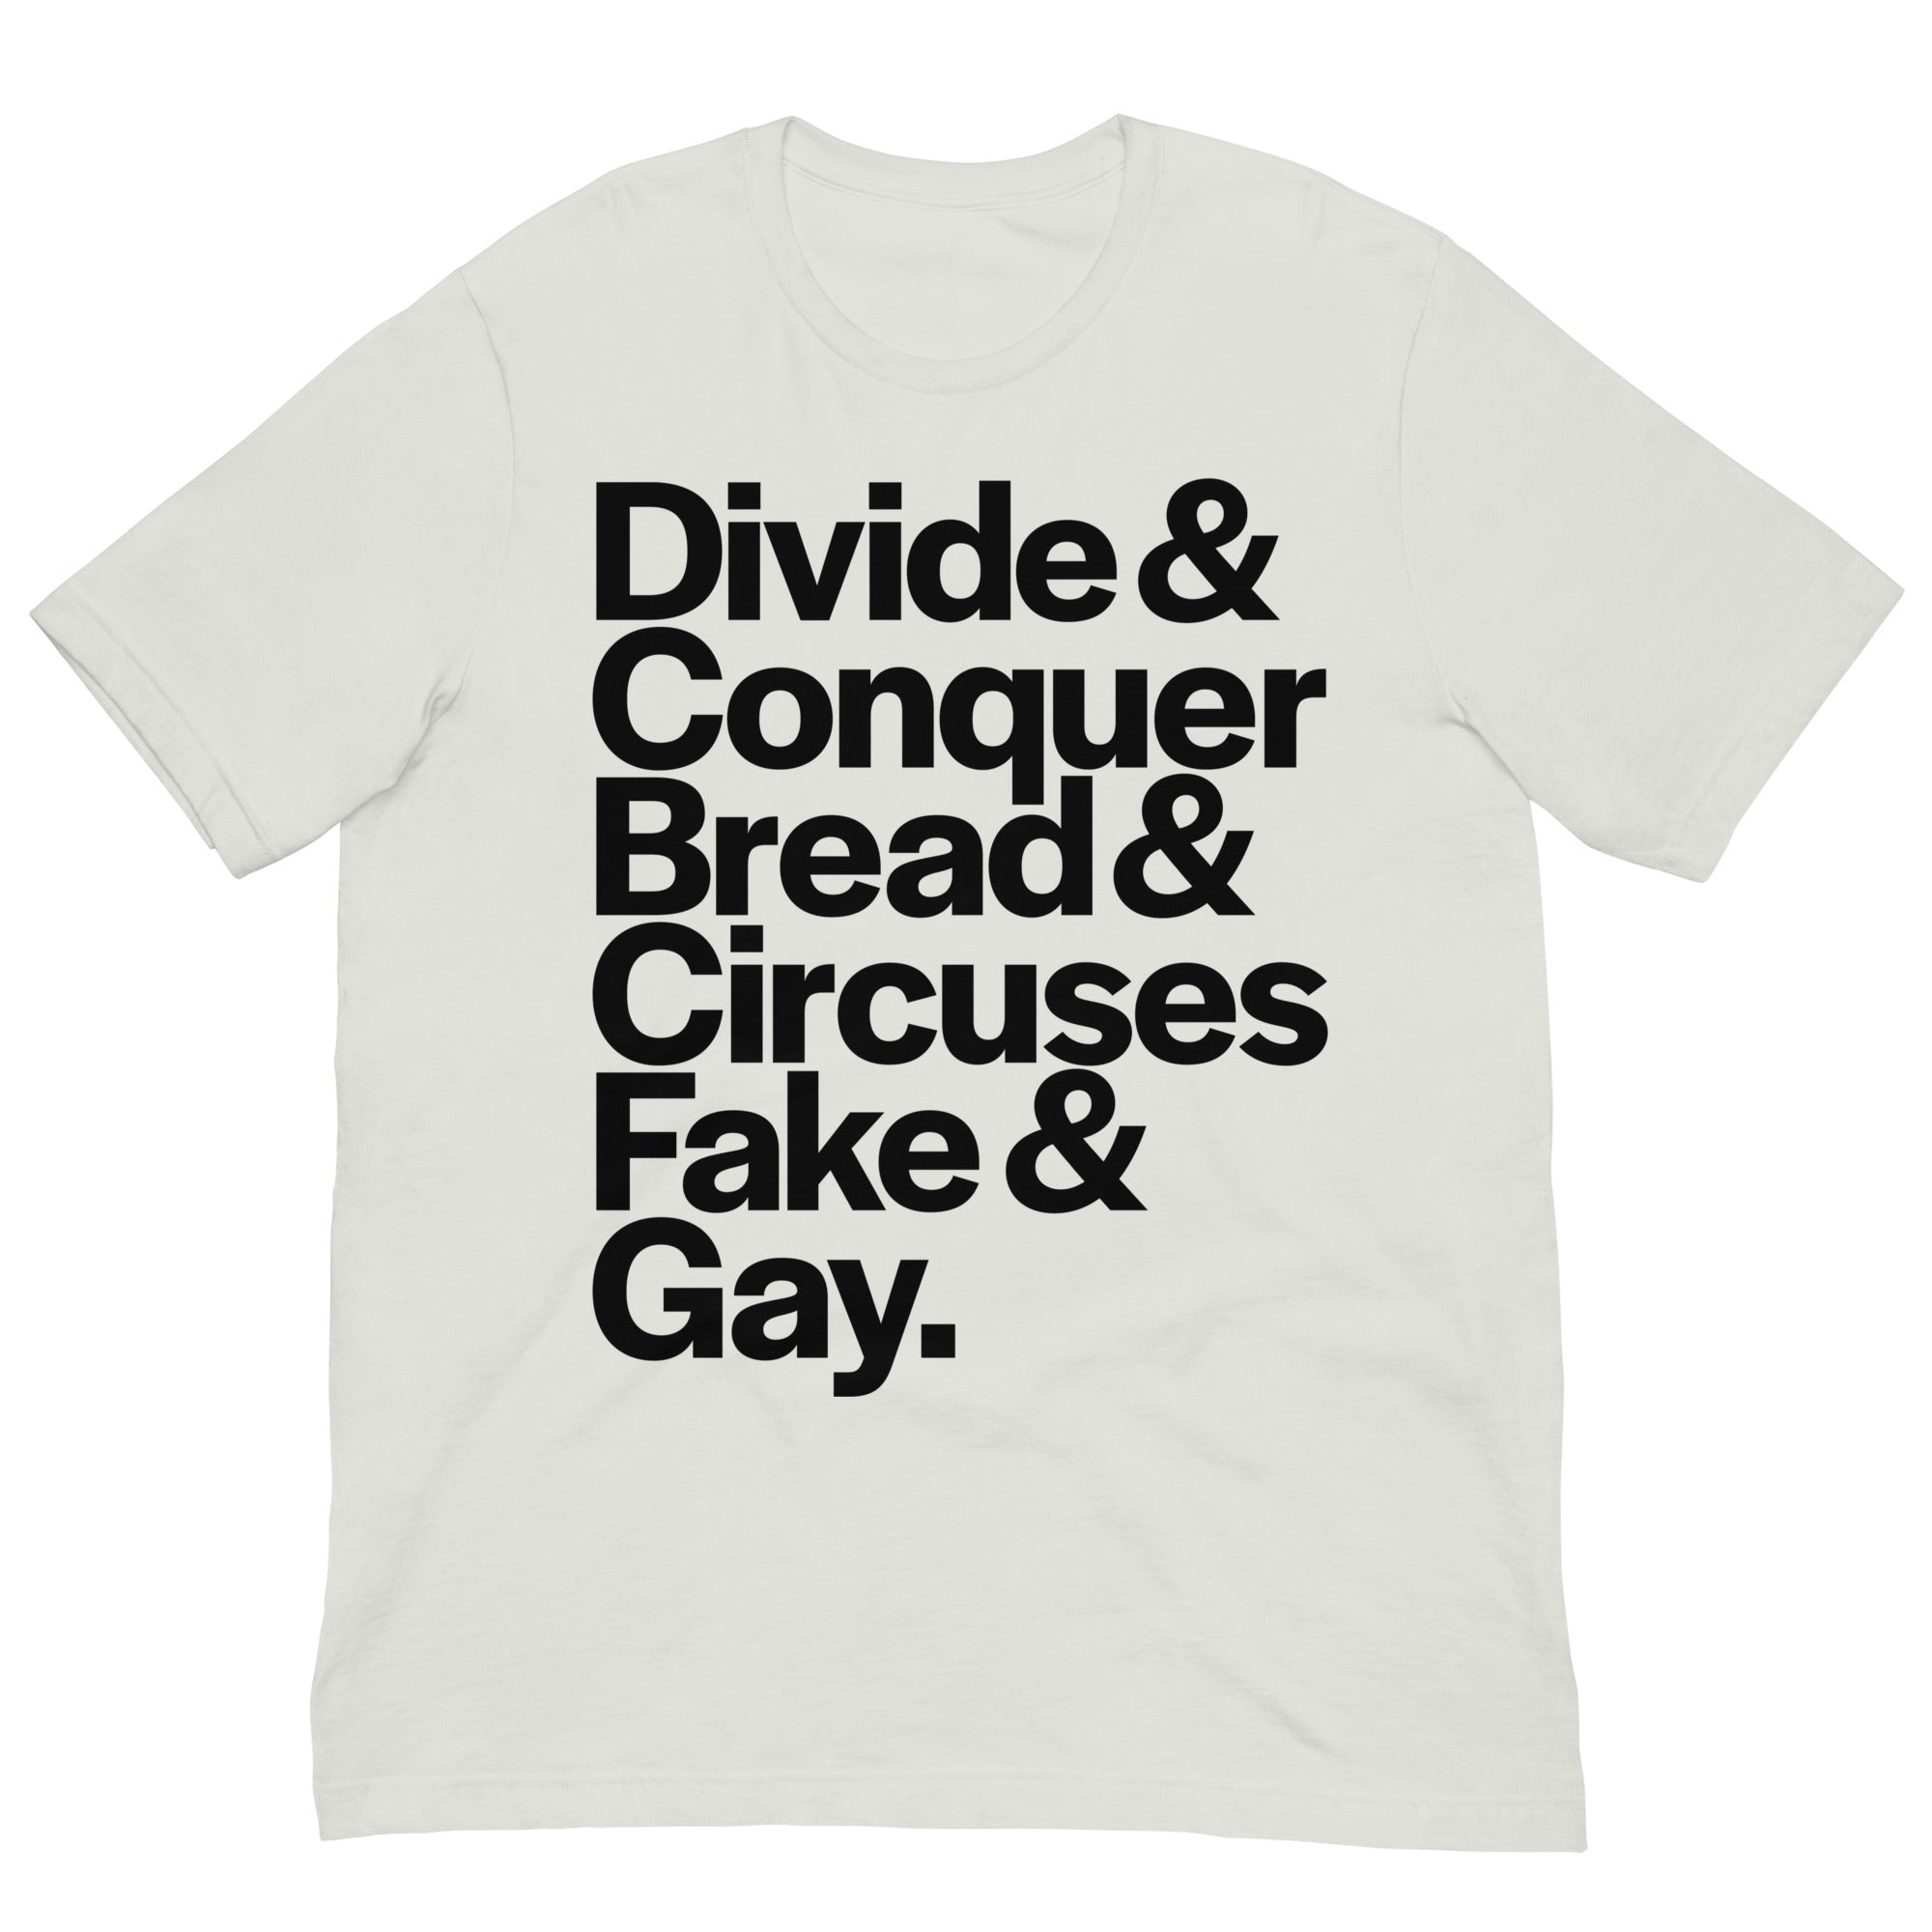 Divide & Conquer Ampersand Graphic T-Shirt